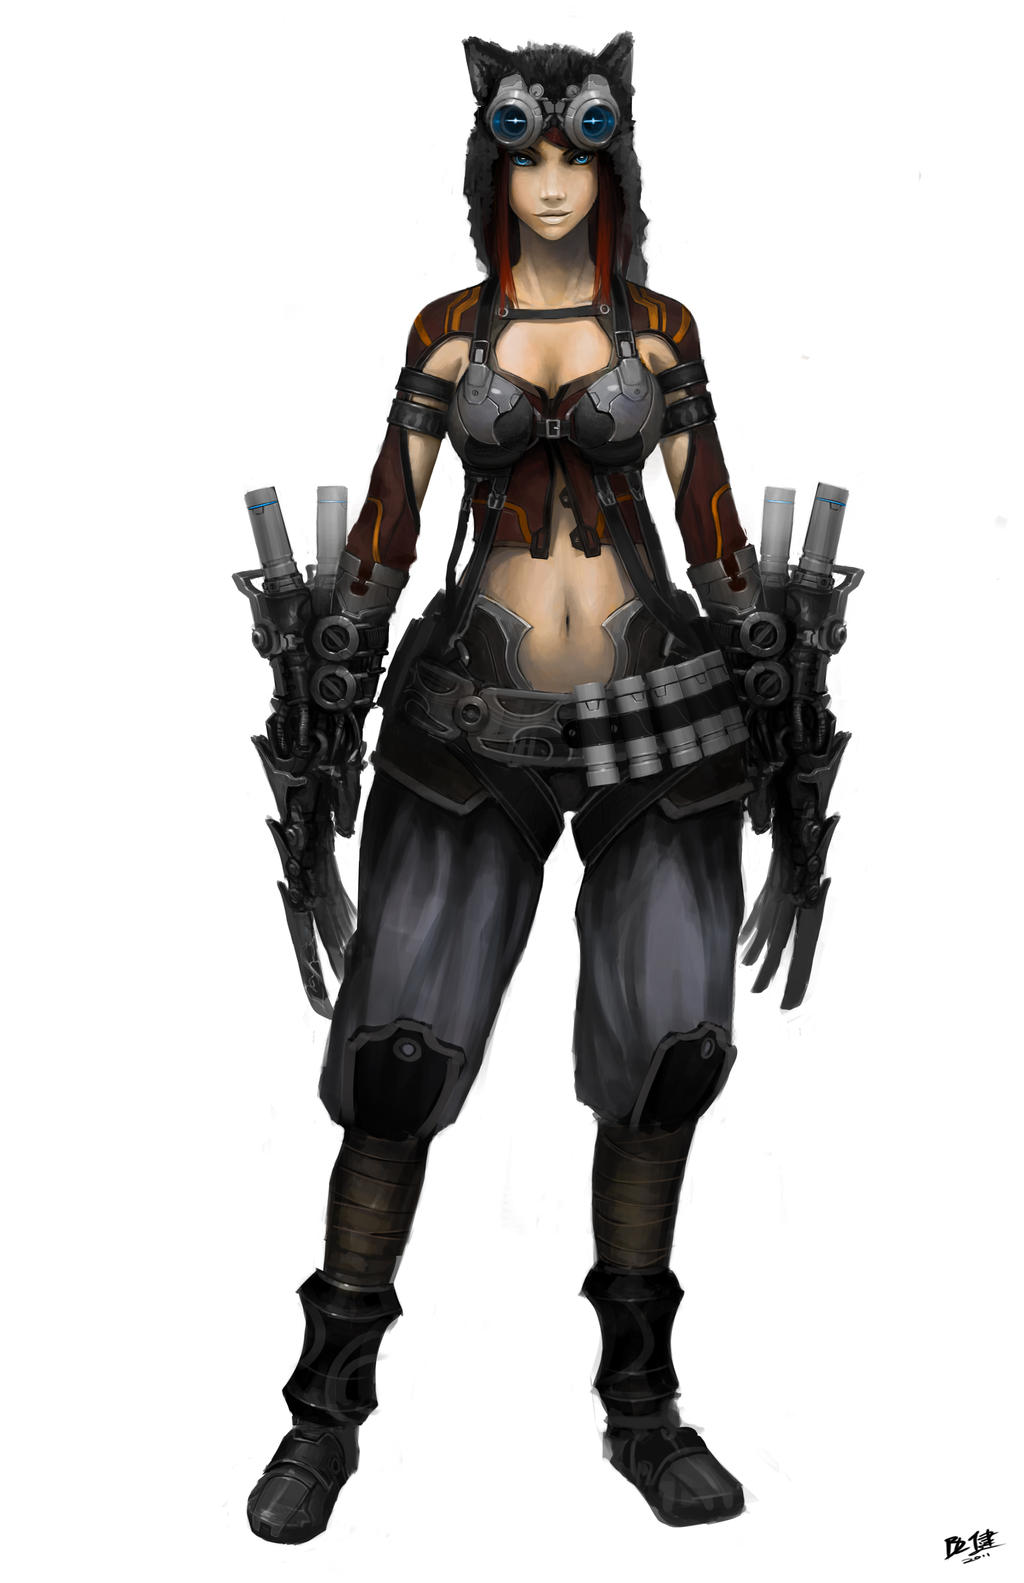 character_concept_3_by_madspartan013-d3hbpd3.jpg